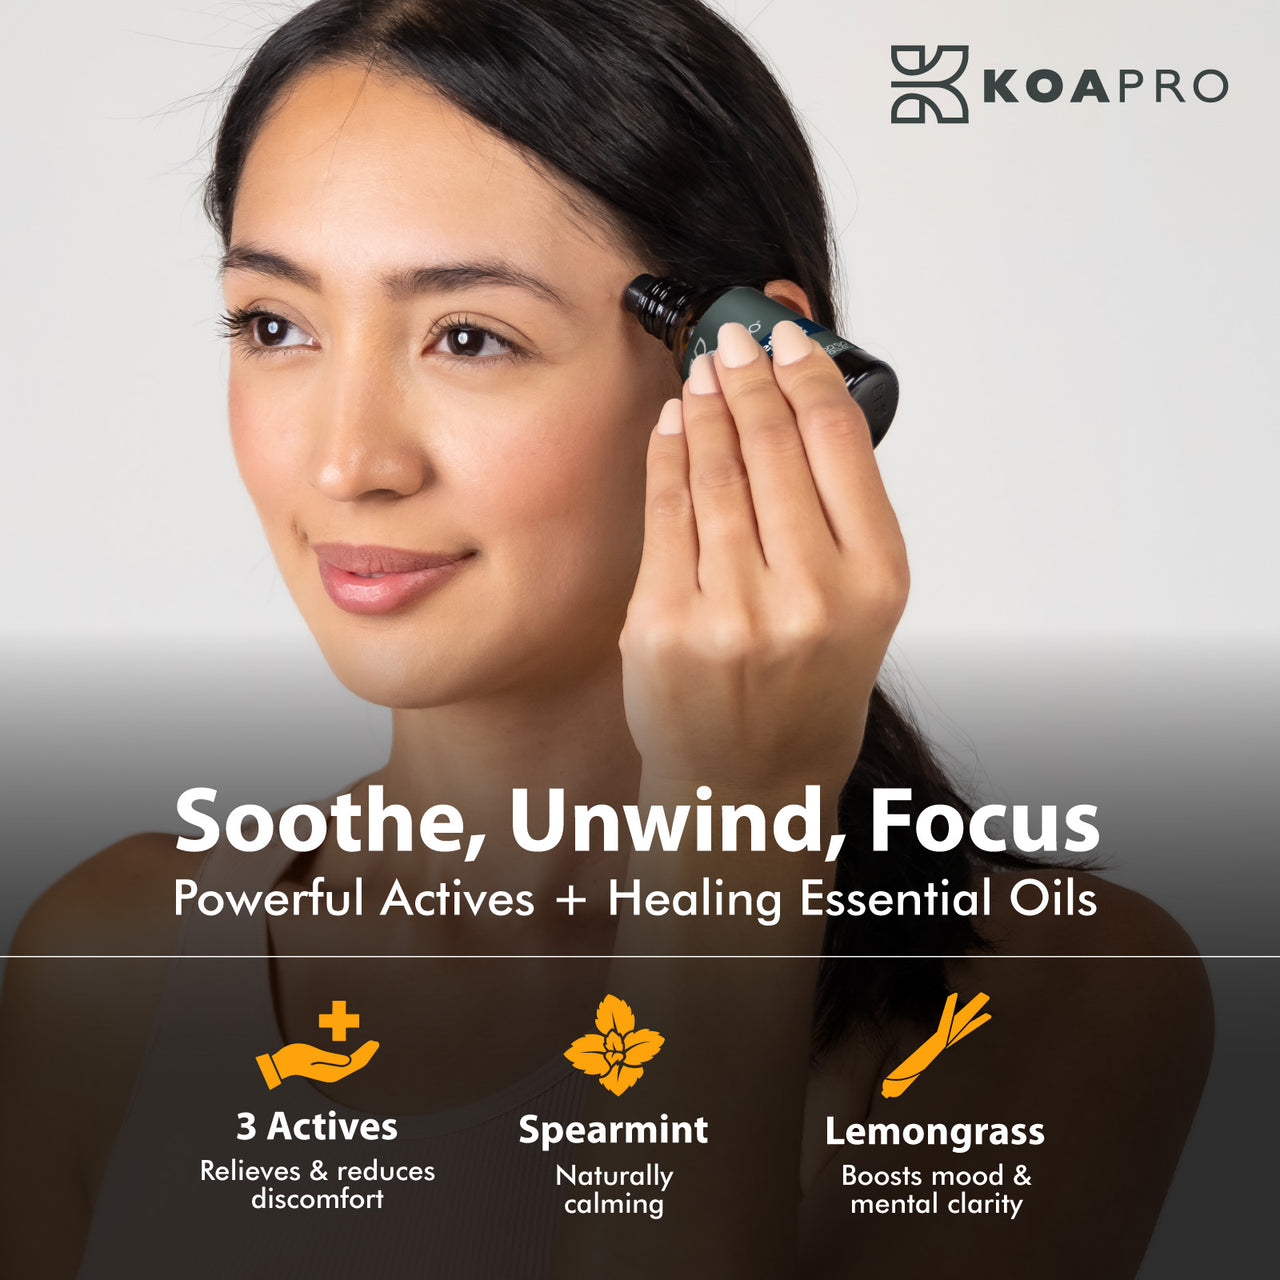 Image of woman applying medicated oil to temple.  Embedded text reads: soothe, unwind, focus.  Powerful actives and healing essential oils.  3 actives- relieves and reduces discomfort, spearmint- naturally calming, lemongrass- boosts mood and mental clarity